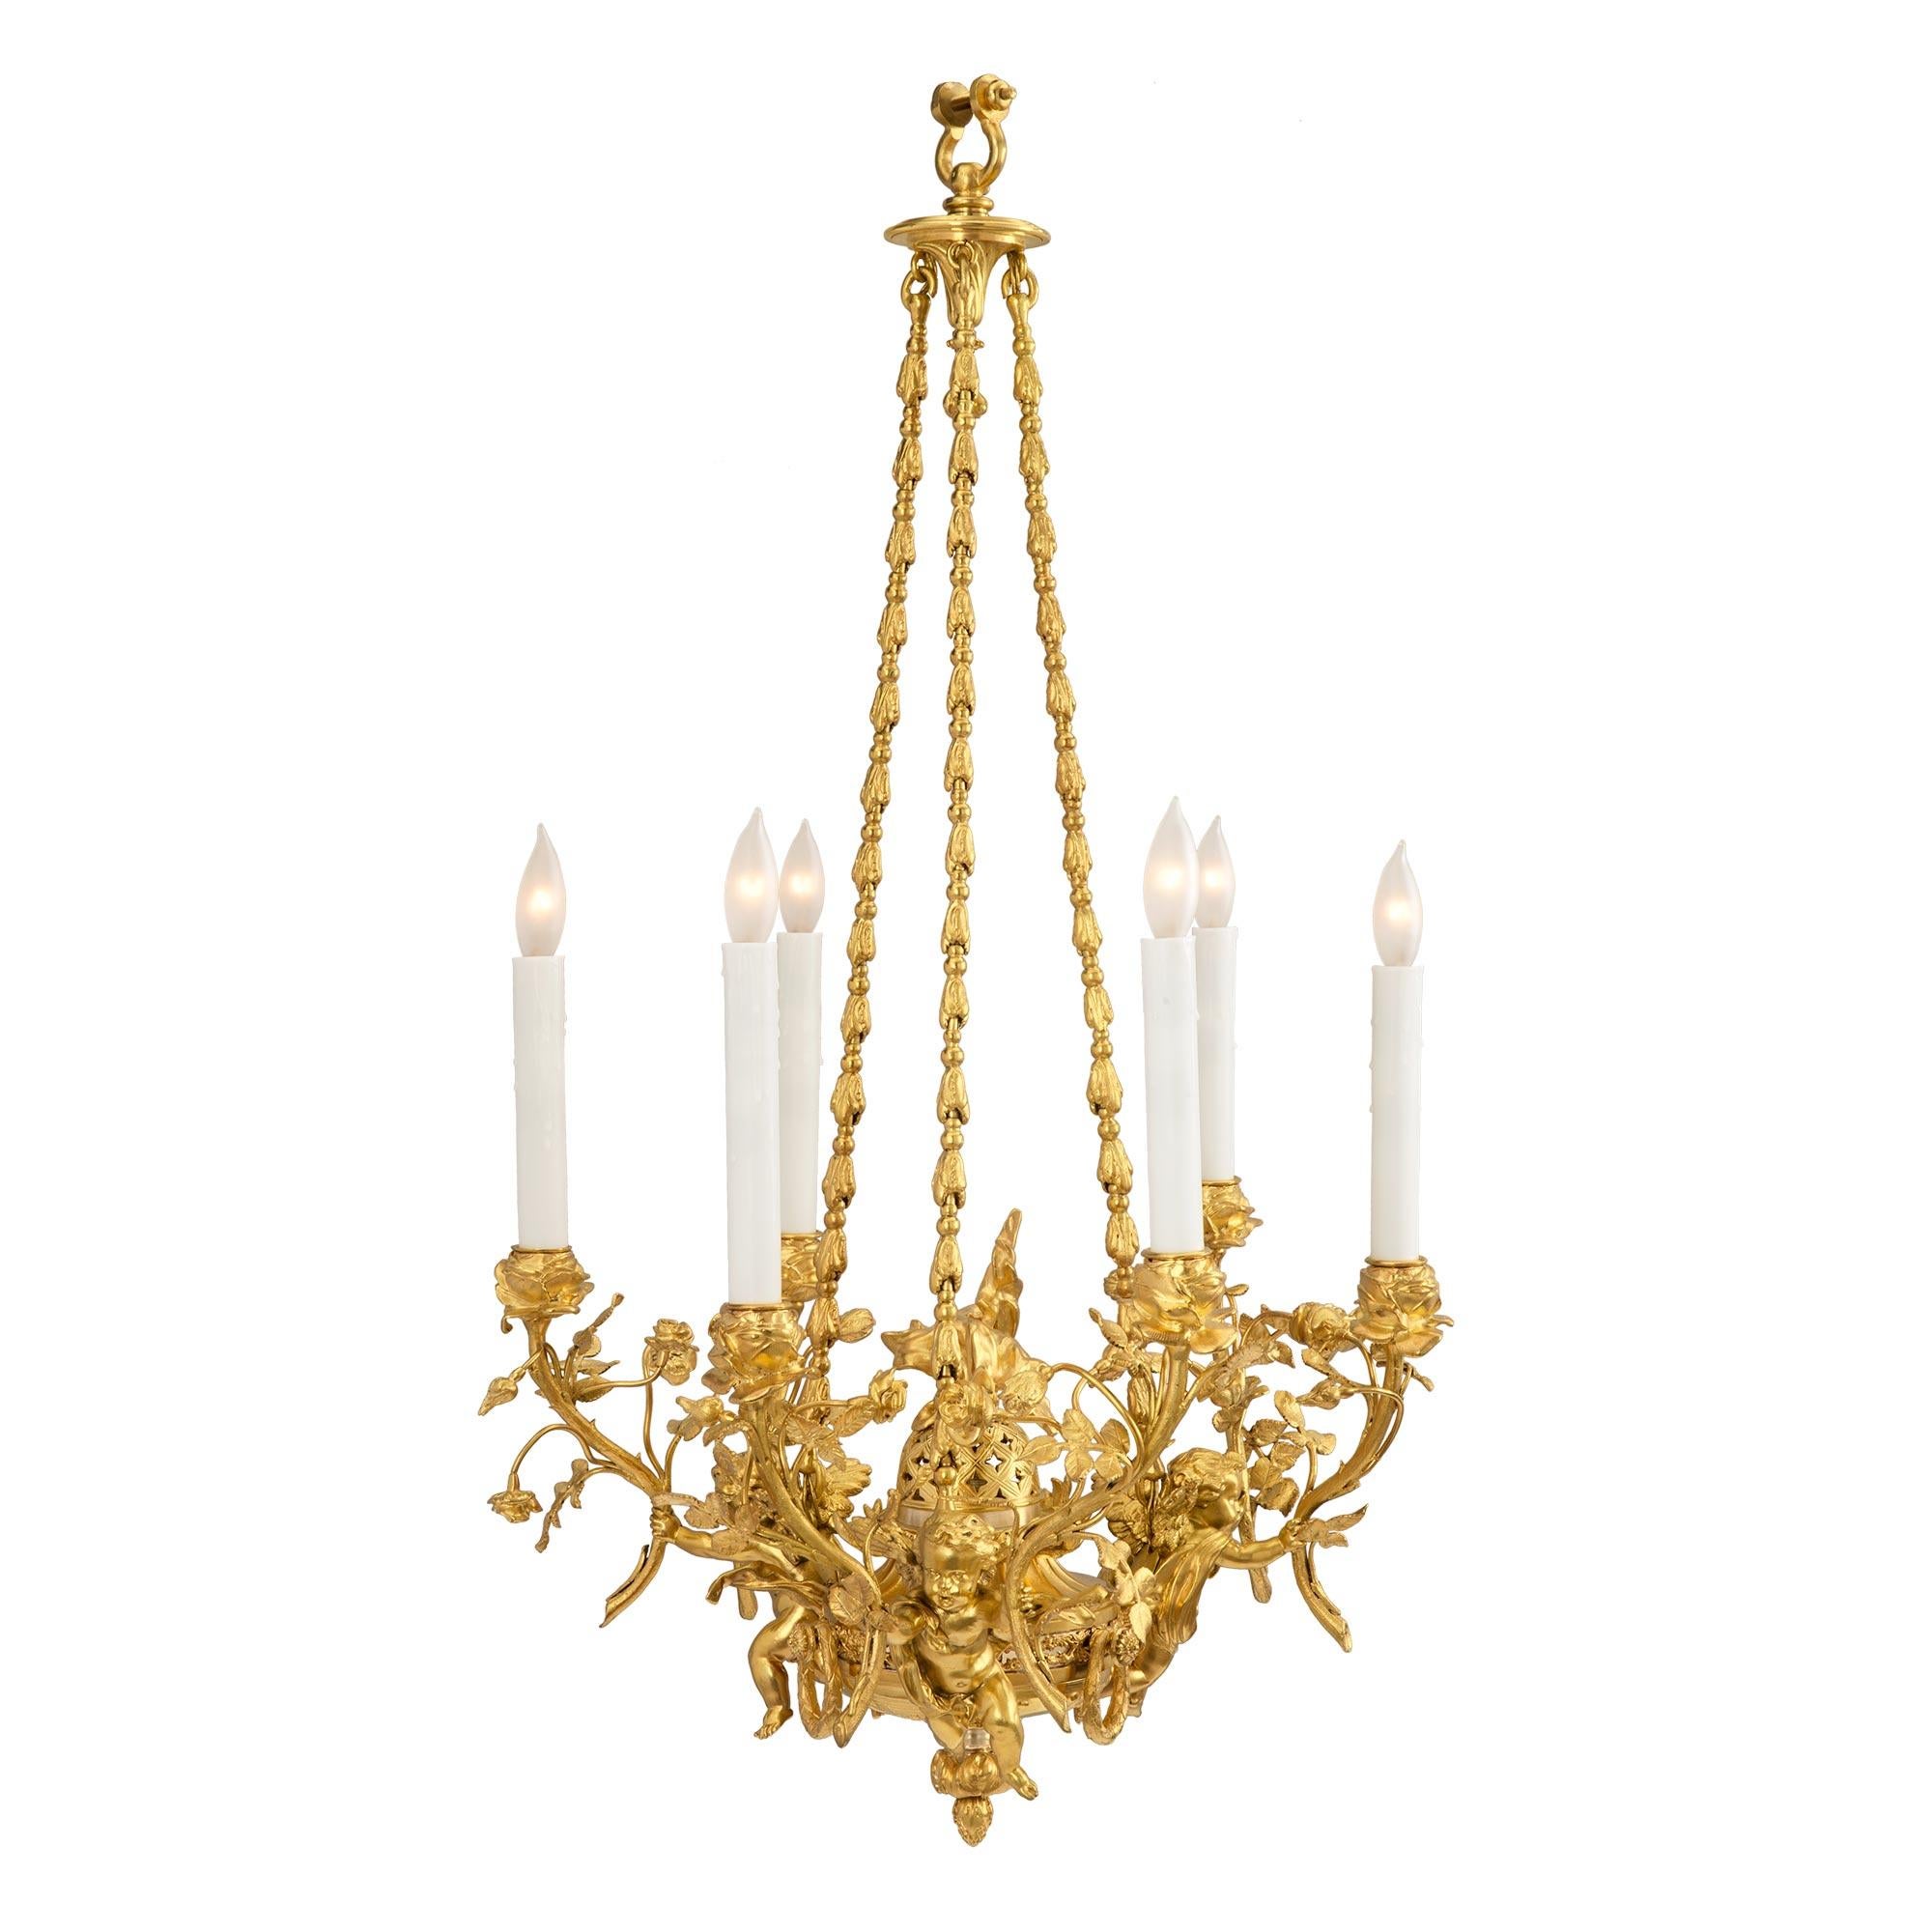 A beautiful and extremely high quality French 19th century Louis XVI st. Belle Époque period six arm ormolu chandelier, attributed to Henry Dasson. The chandelier displays a lovely inverted bottom foliate finial centered by four fine foliate